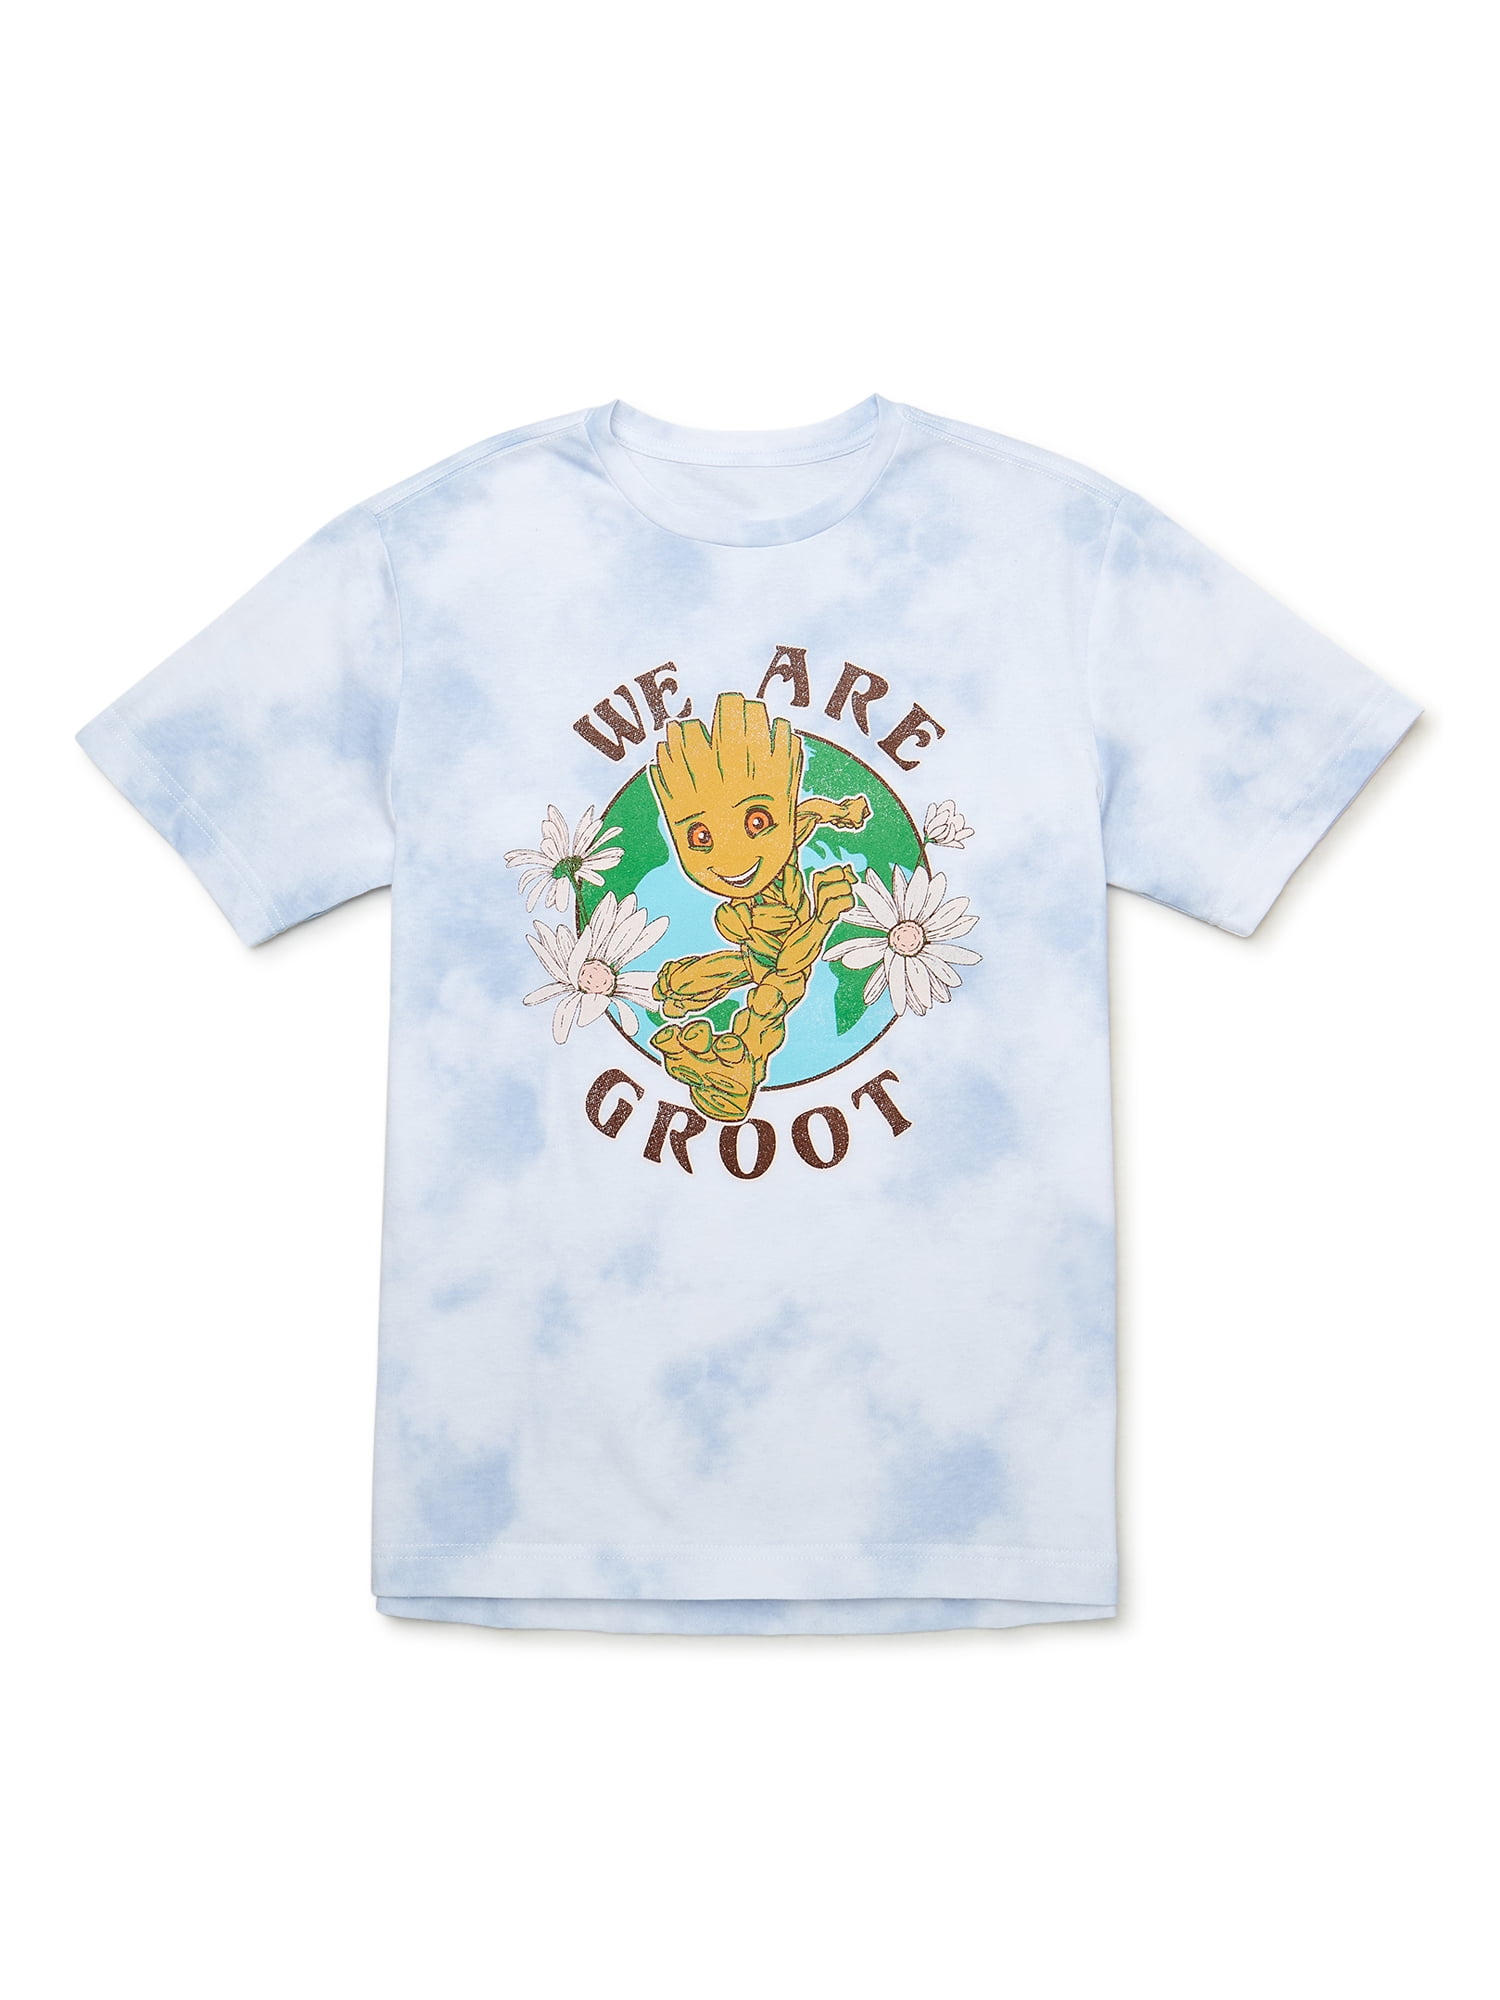 Groot Boys T-Shirt with Short Sleeves, Sizes 4-18